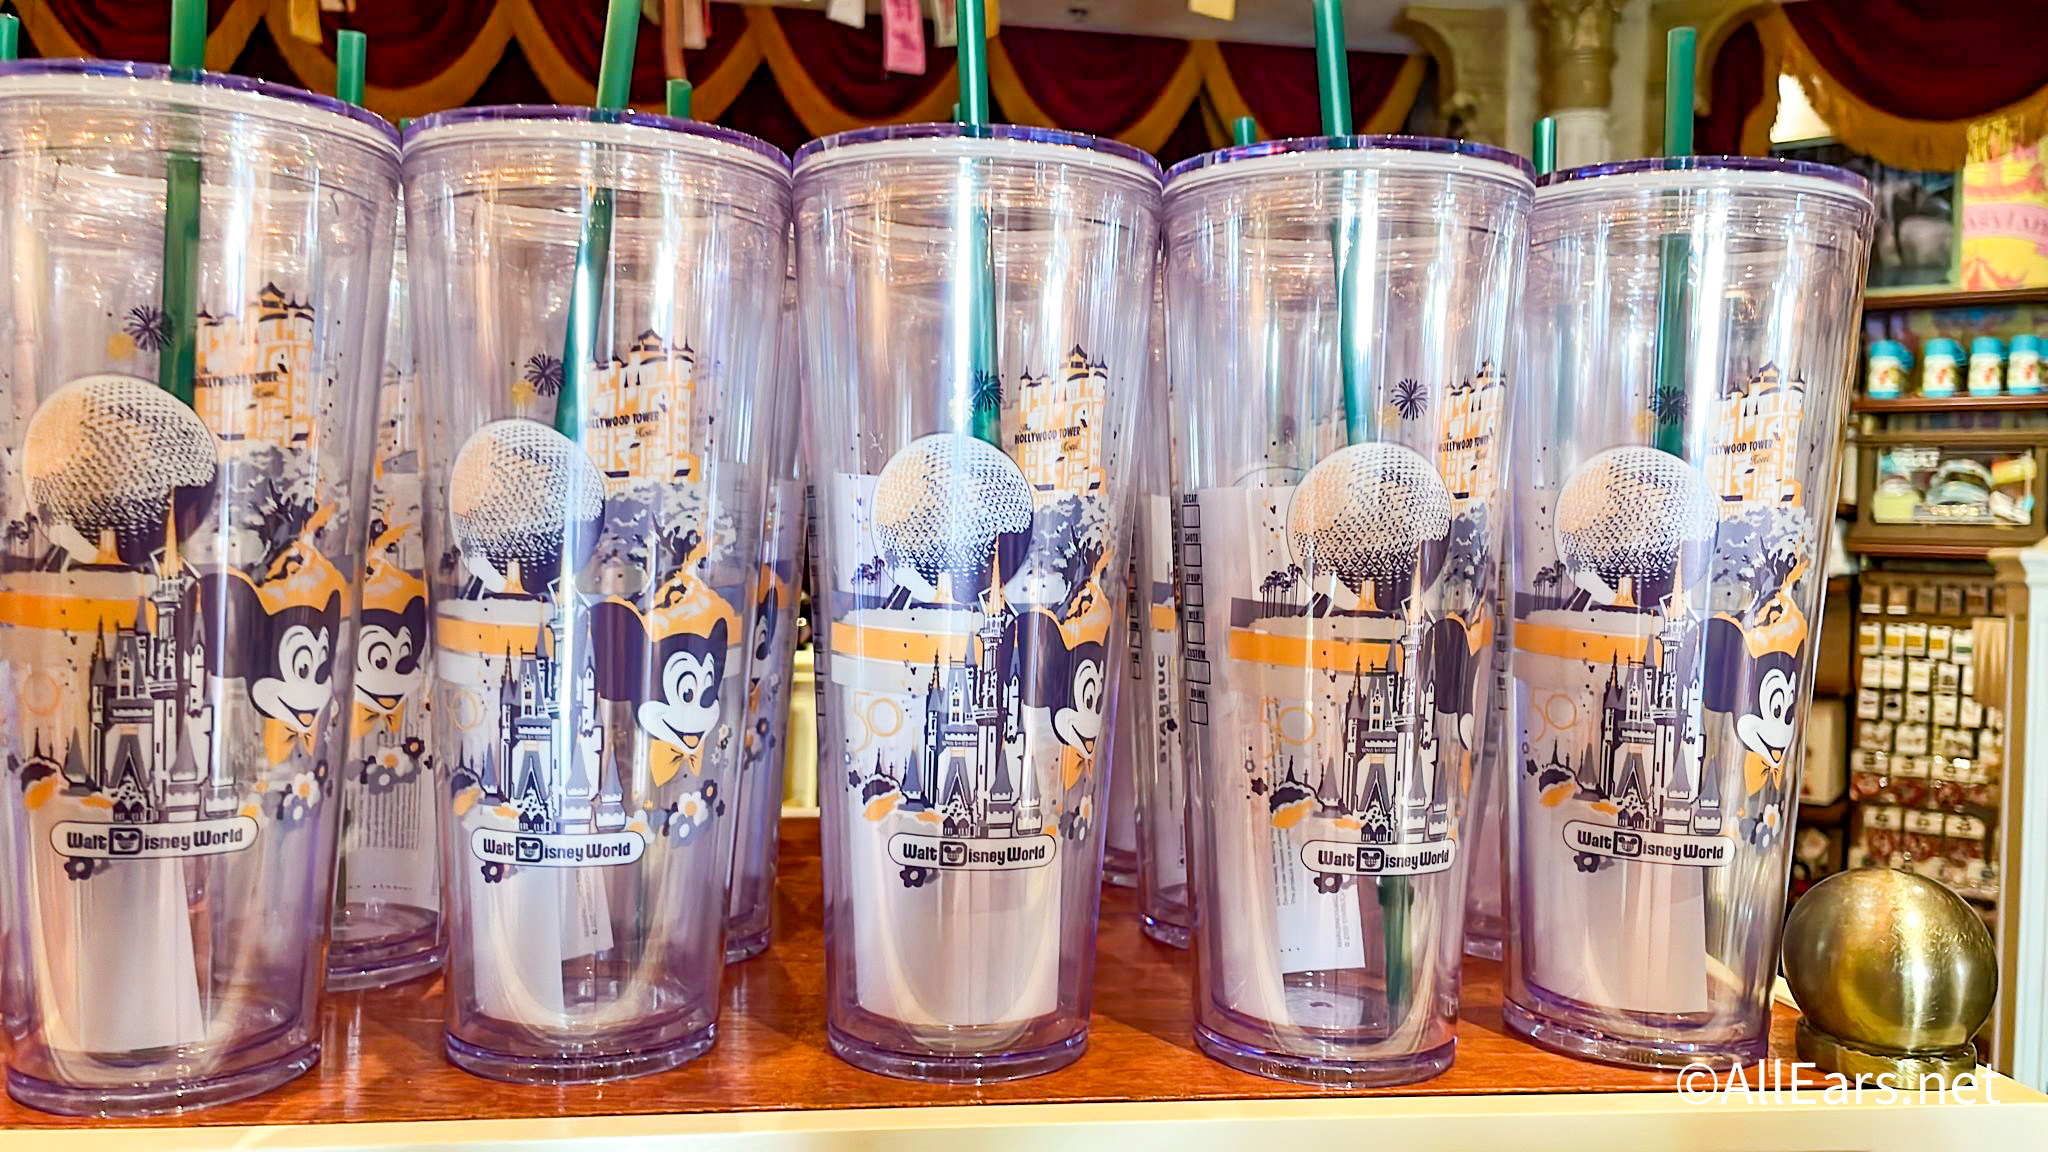 PHOTOS: New 50th Anniversary Vintage-Style Starbucks Tumbler Available at  Walt Disney World - WDW News Today